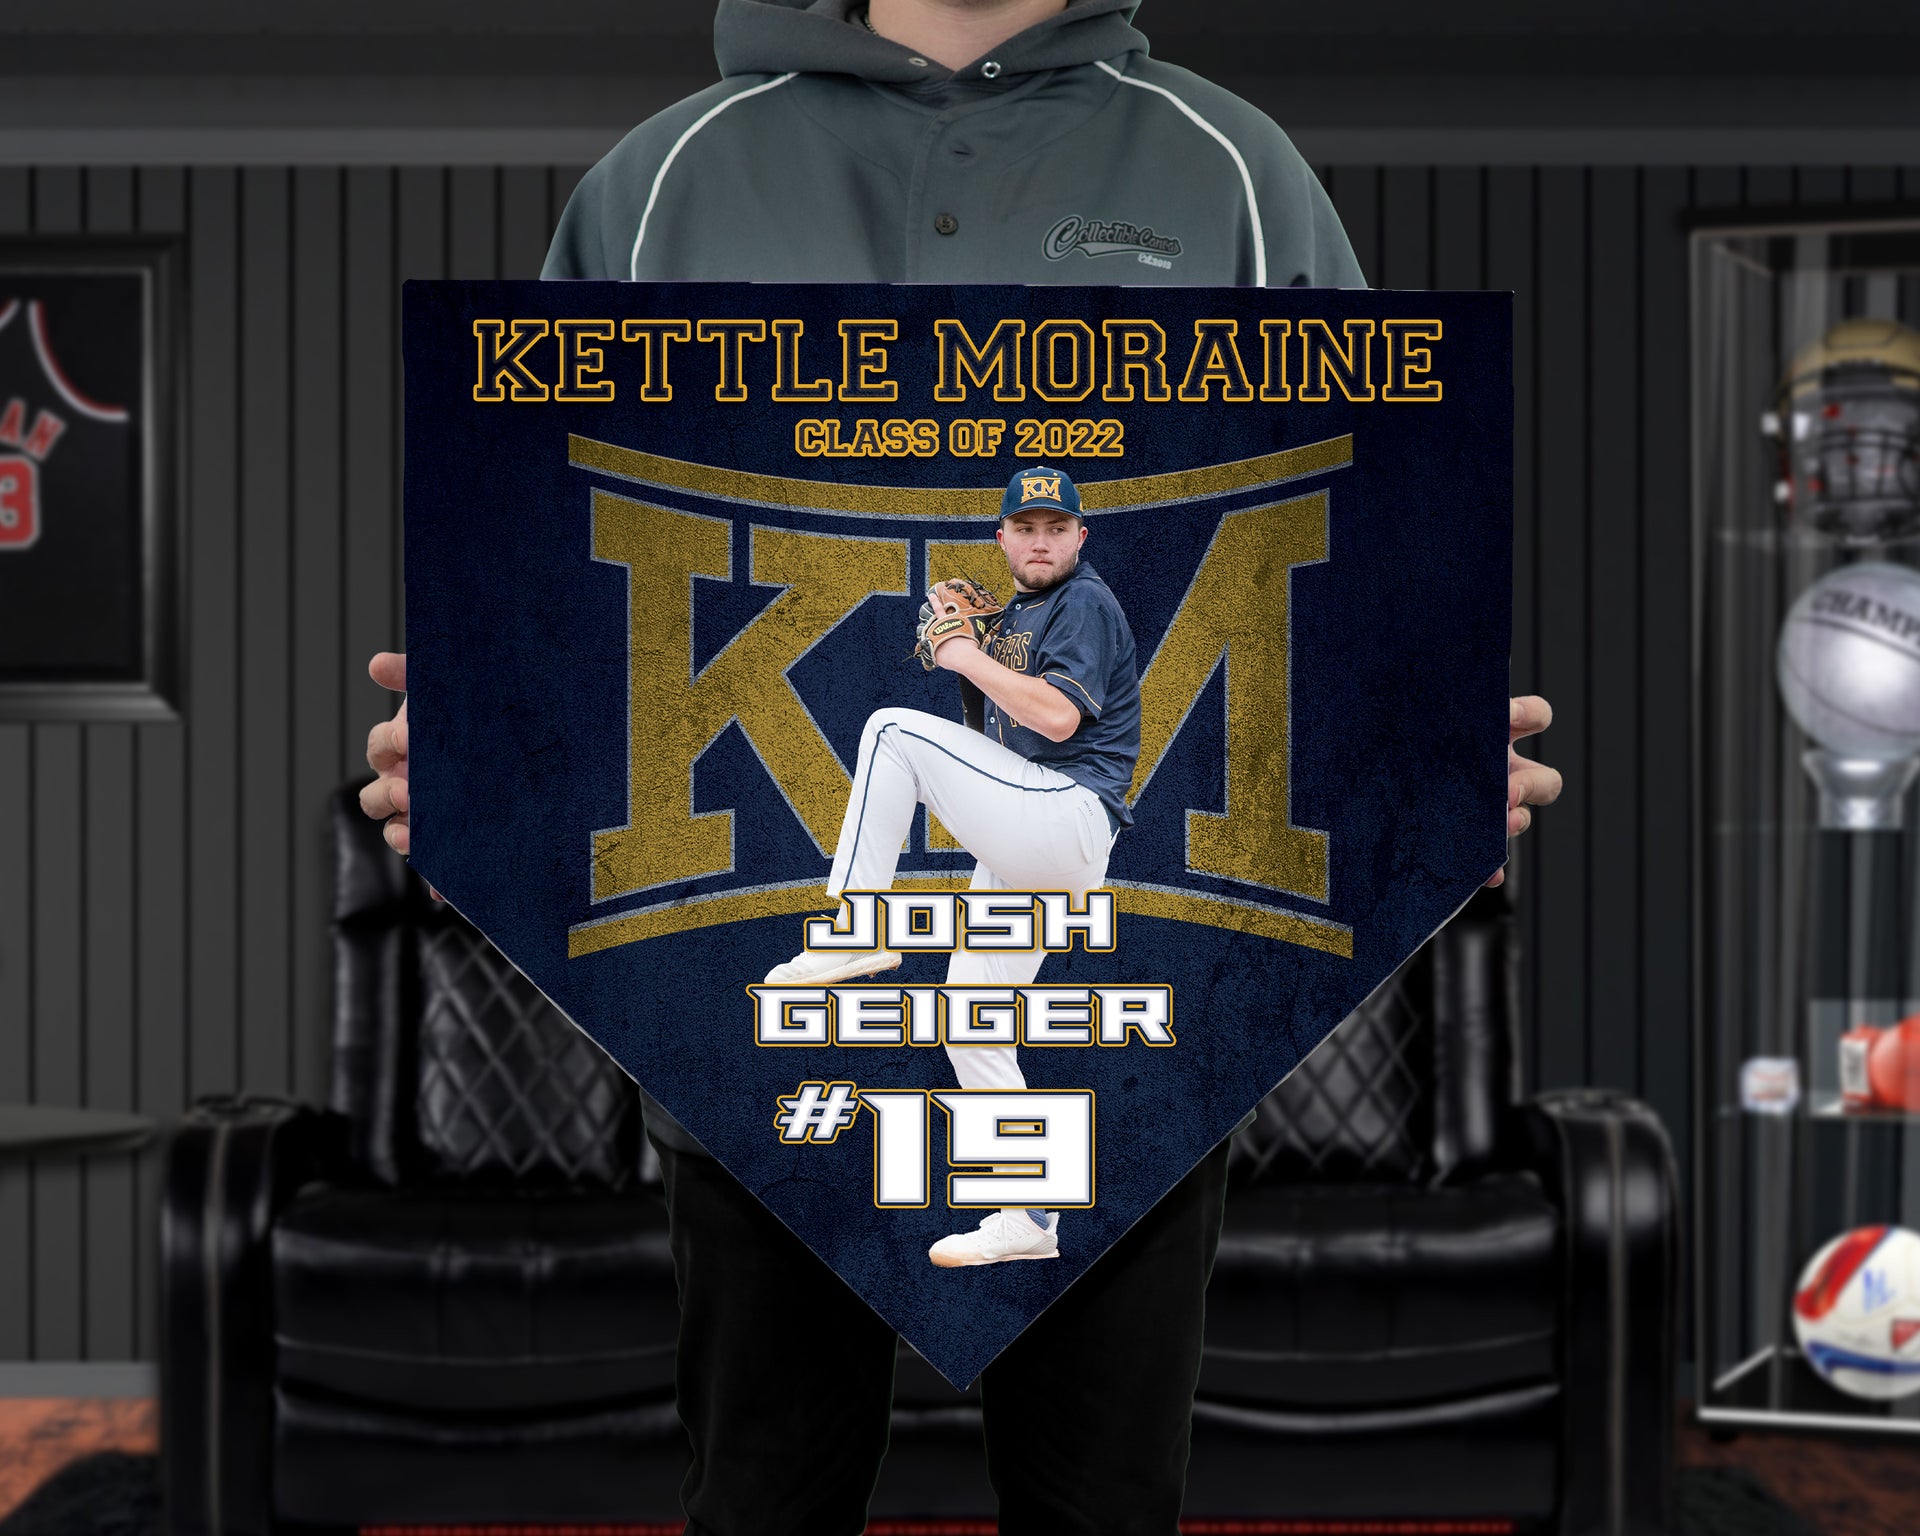 Held Collectible Canvas Embedded Grunge Home Plate for  Kettle Moraine High Pitcher Senior 2022